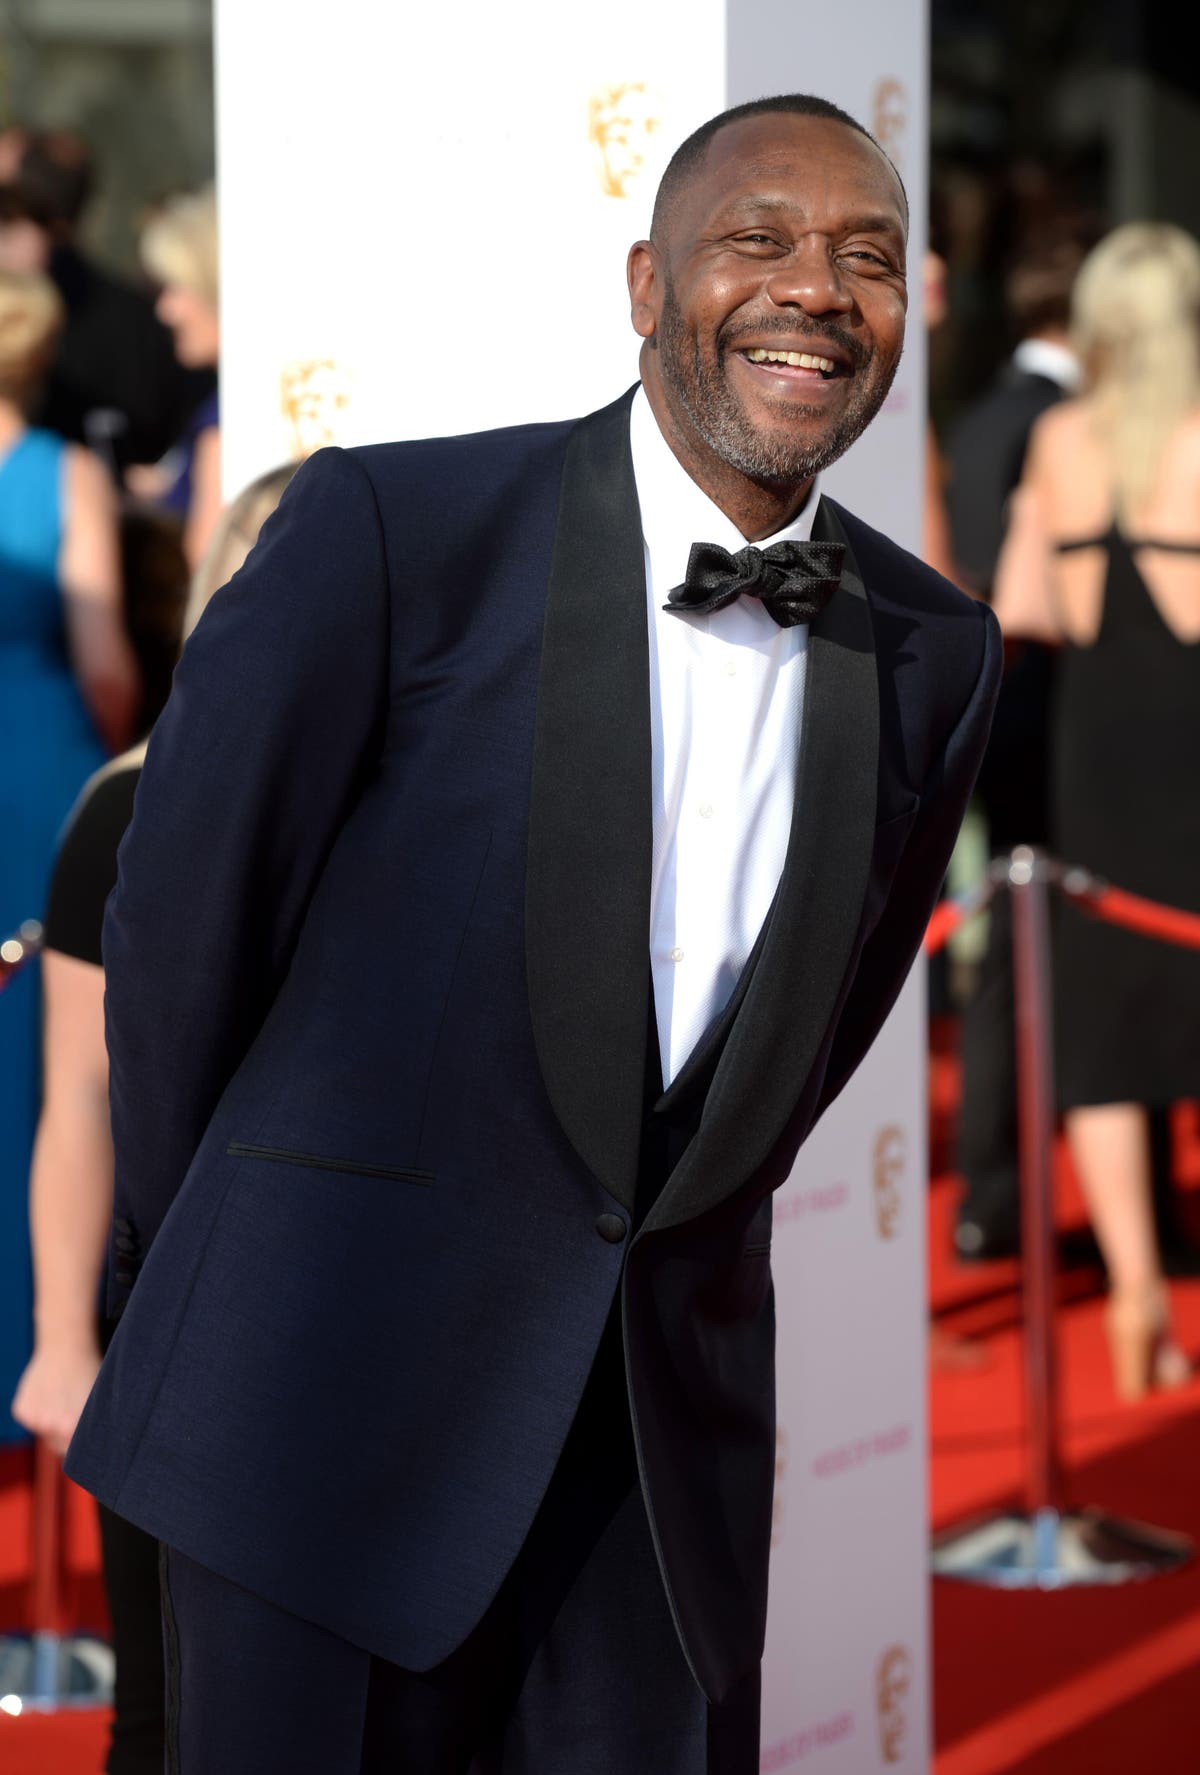 Lenny Henry on stopping school bullies with jokes